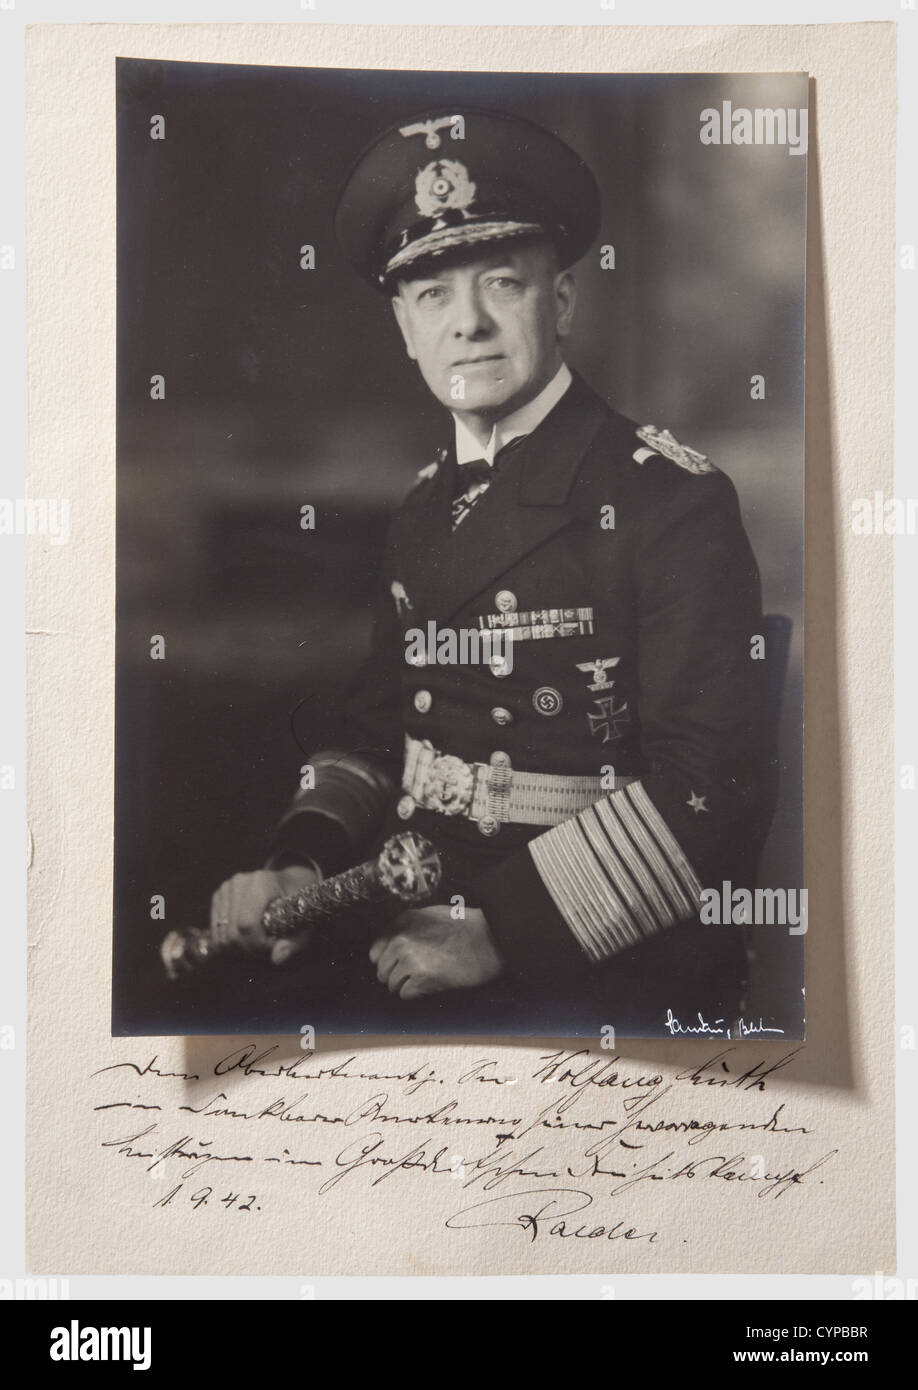 Grand Admiral Erich Raeder, An official photograph dedicated to U-boat Captain, Wolfgang Lüth The Kriegsmarine Commander in Chief in uniform with his Grand Admiral's baton, and wearing the Knight's Cross. The photographer's signature, "Sandau, Berlin," at the lowe people, 1930s, 20th century, navy, naval forces, military, militaria, branch of service, branches of service, armed forces, armed service, object, objects, stills, clipping, clippings, cut out, cut-out, cut-outs, man, men, male, Stock Photo